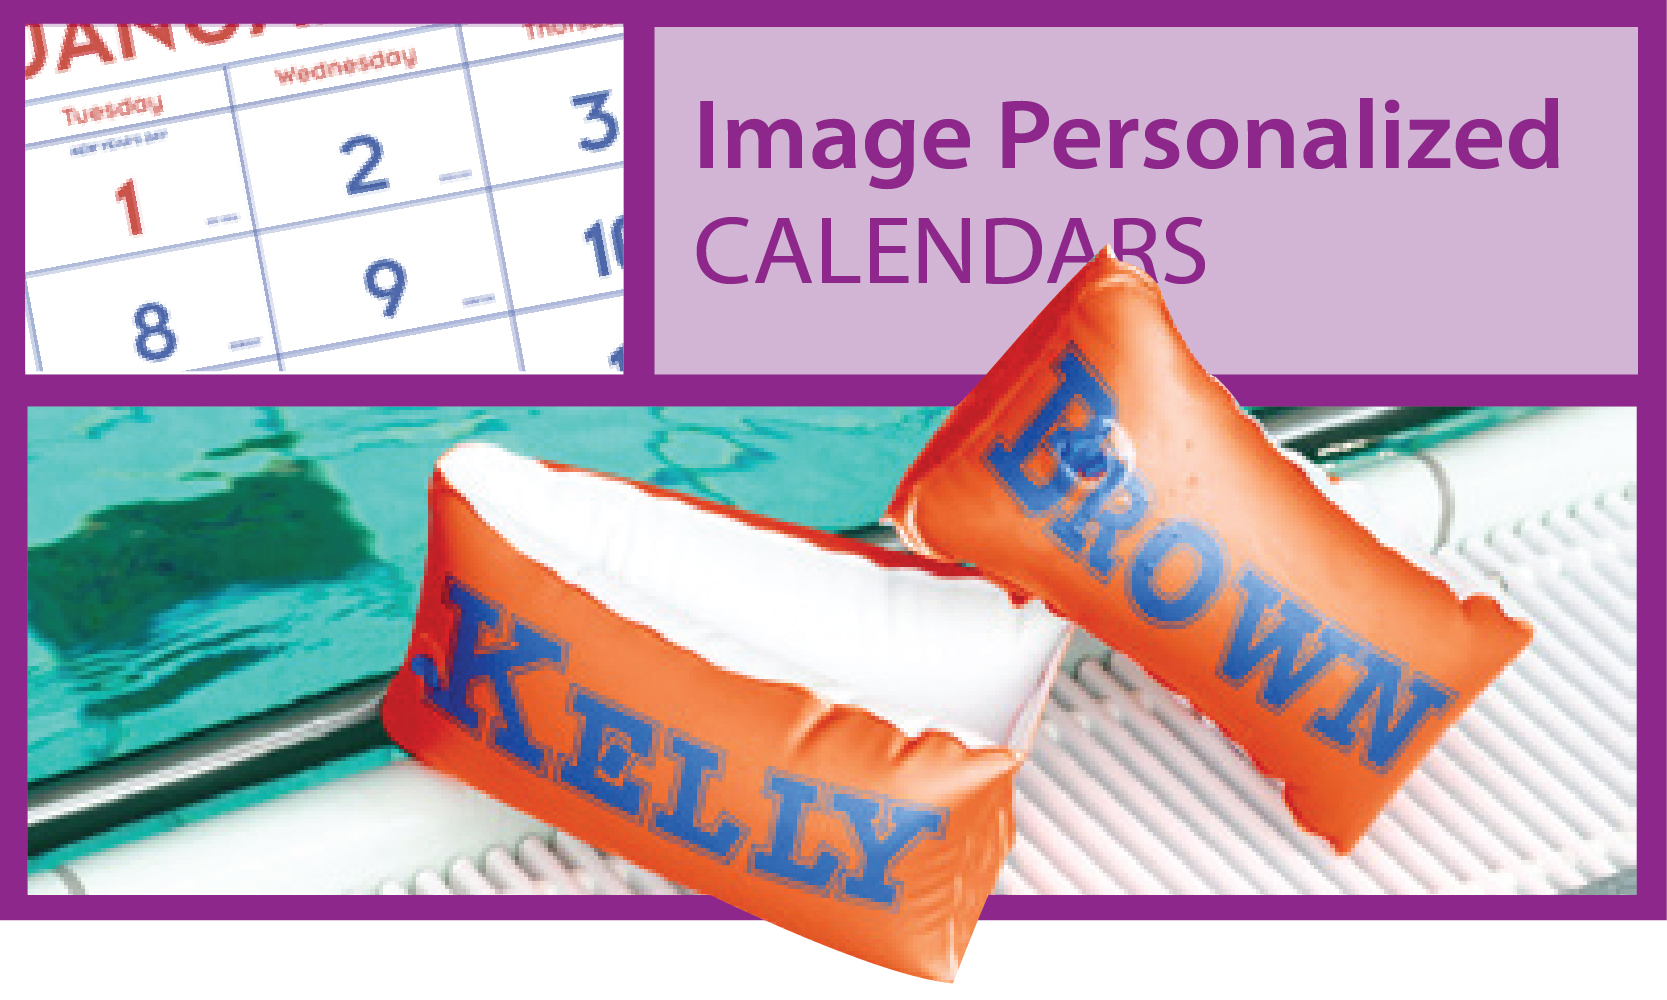 Promotional Image Personalized Calendars